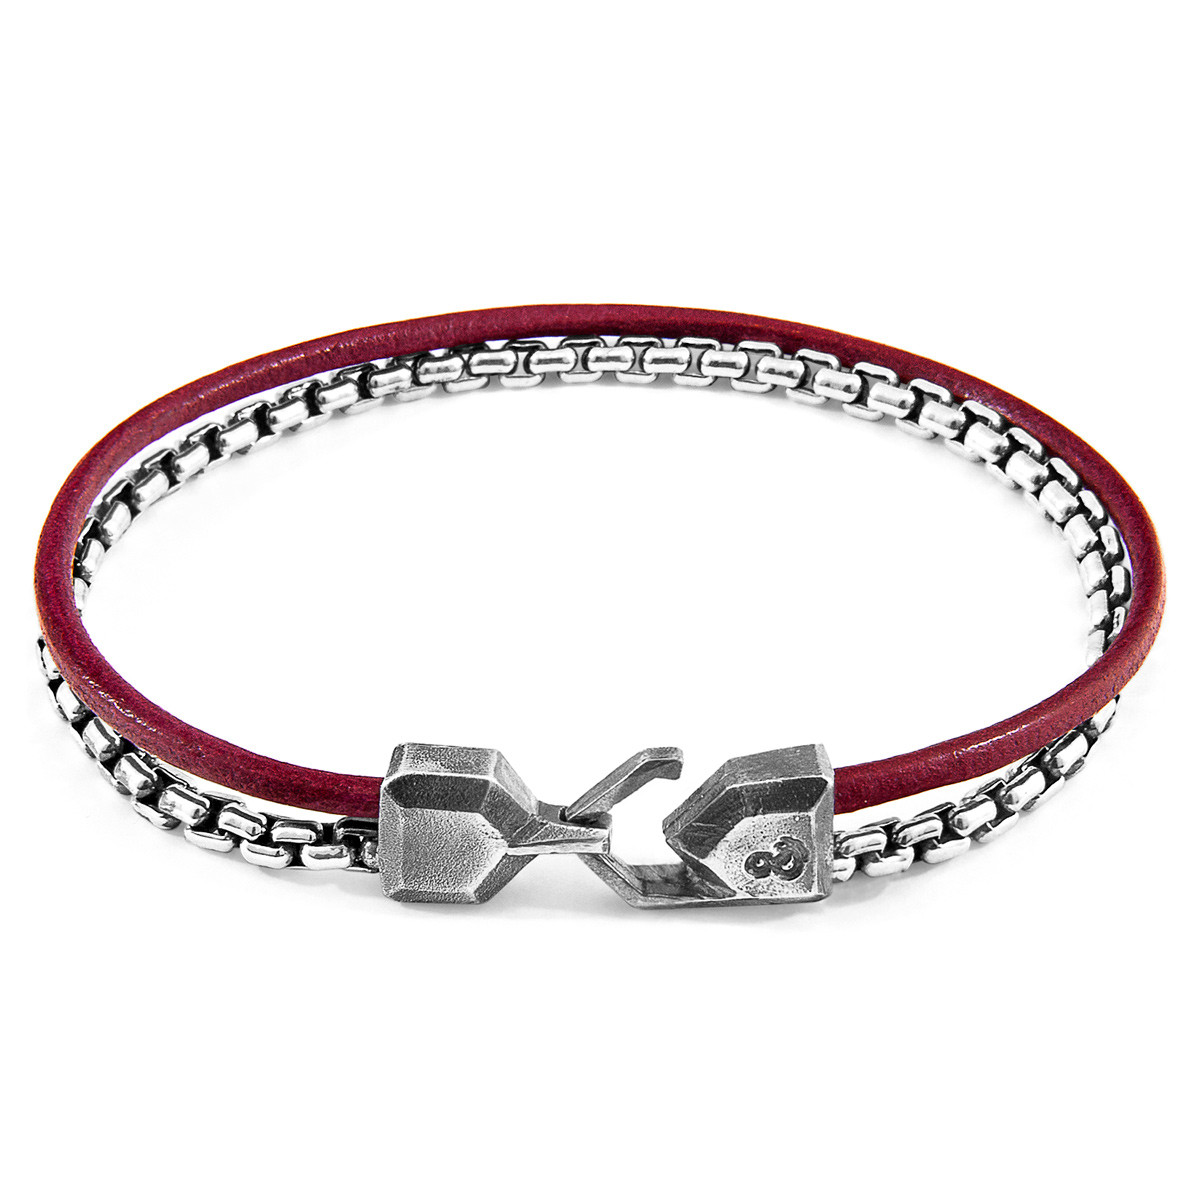 Bordeaux Red Moonraker Mast Silver and Round Leather Bracelet